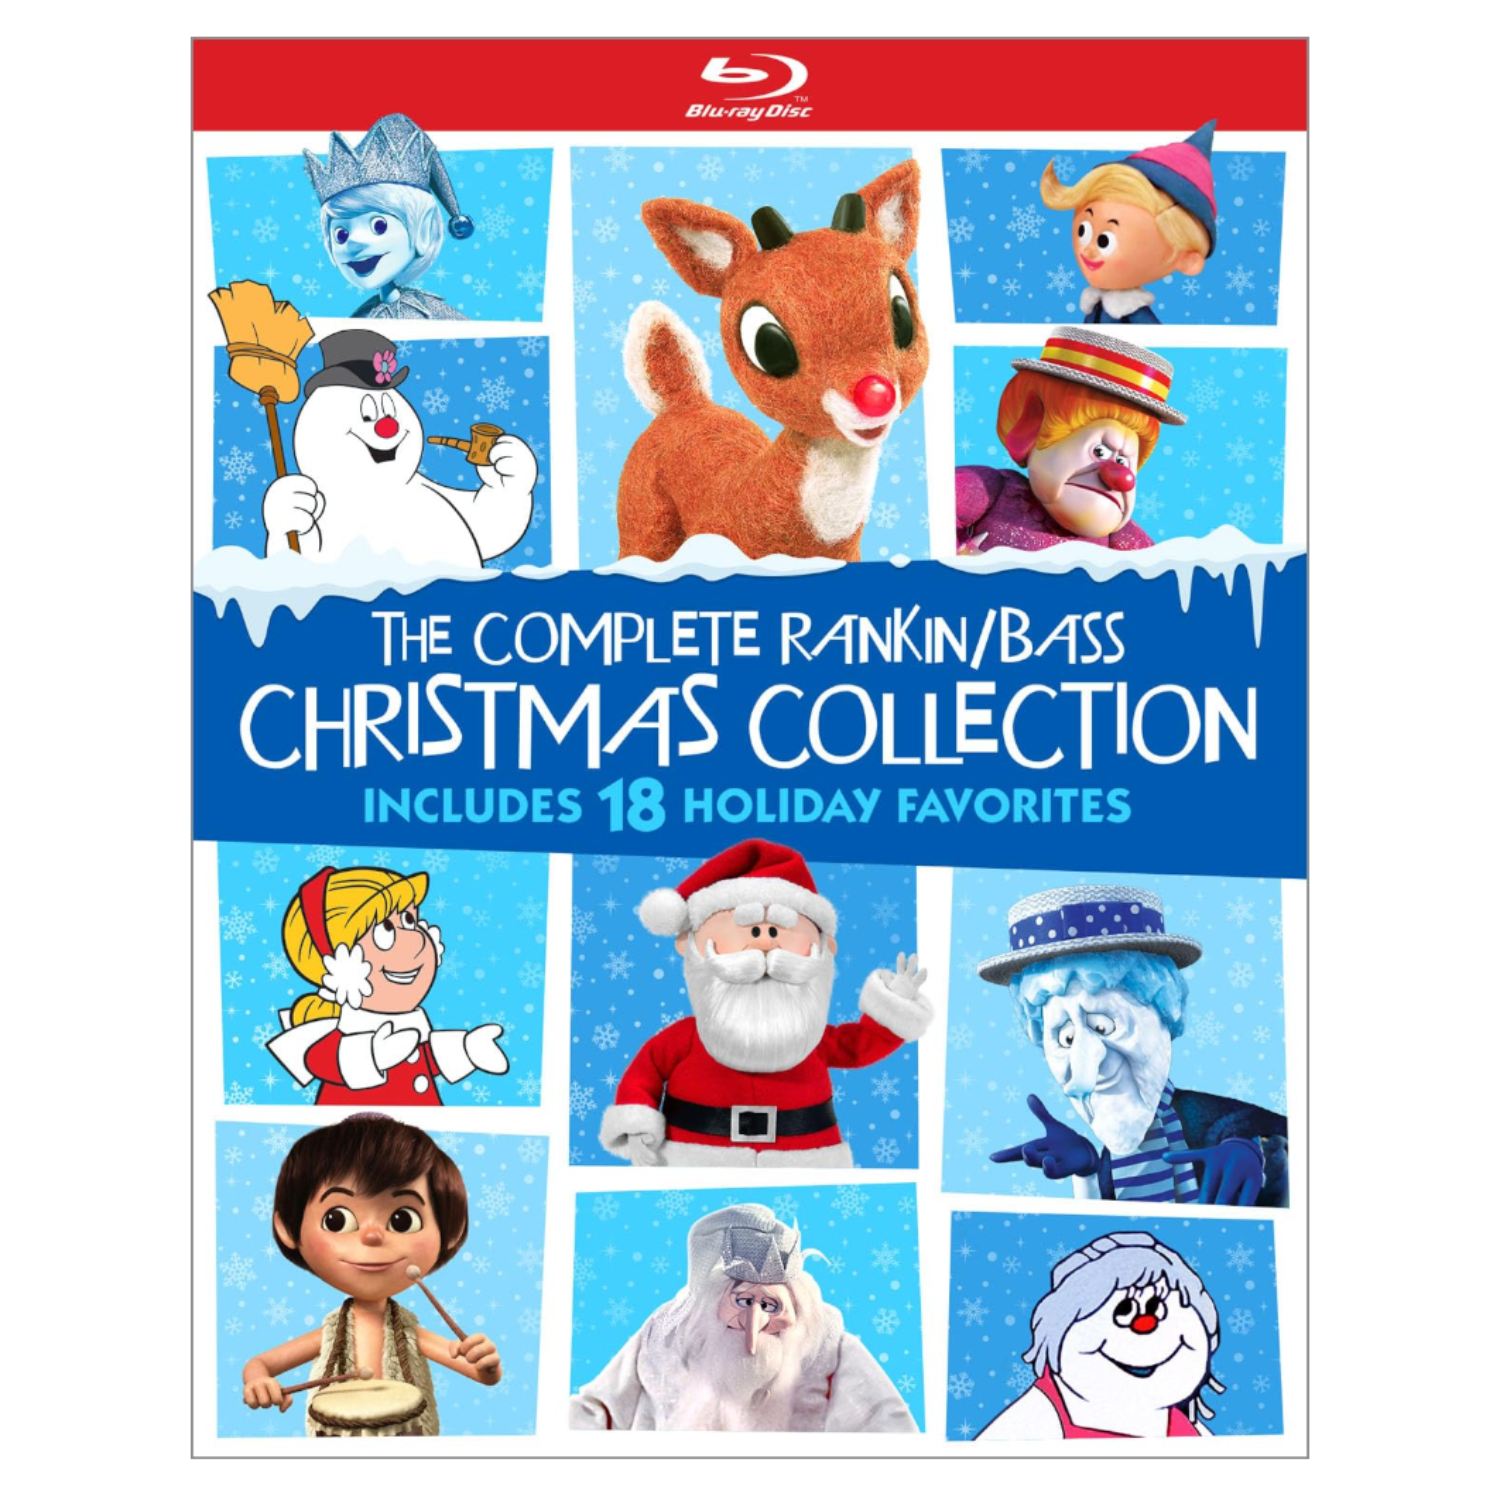 The Complete Rankin Bass Christmas Collection